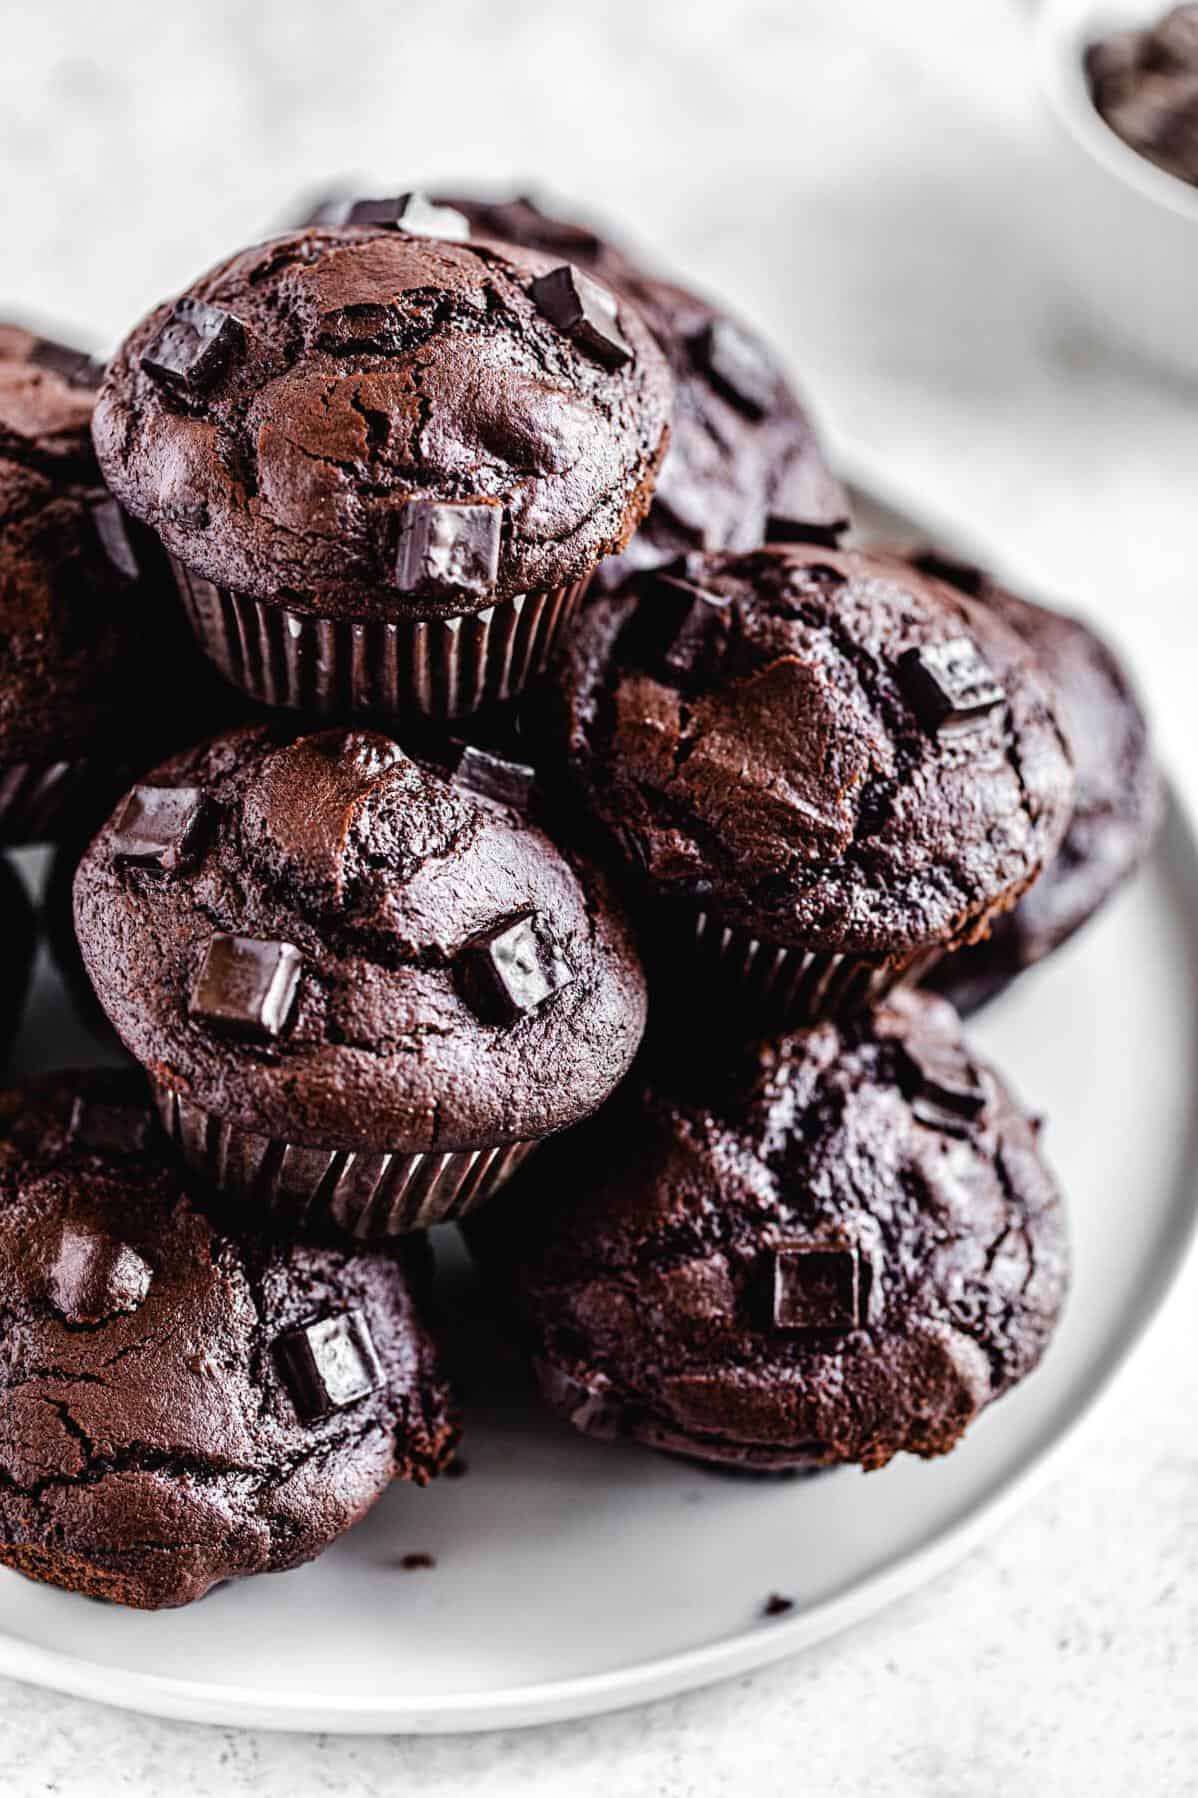  No such thing as too much chocolate with these muffins!